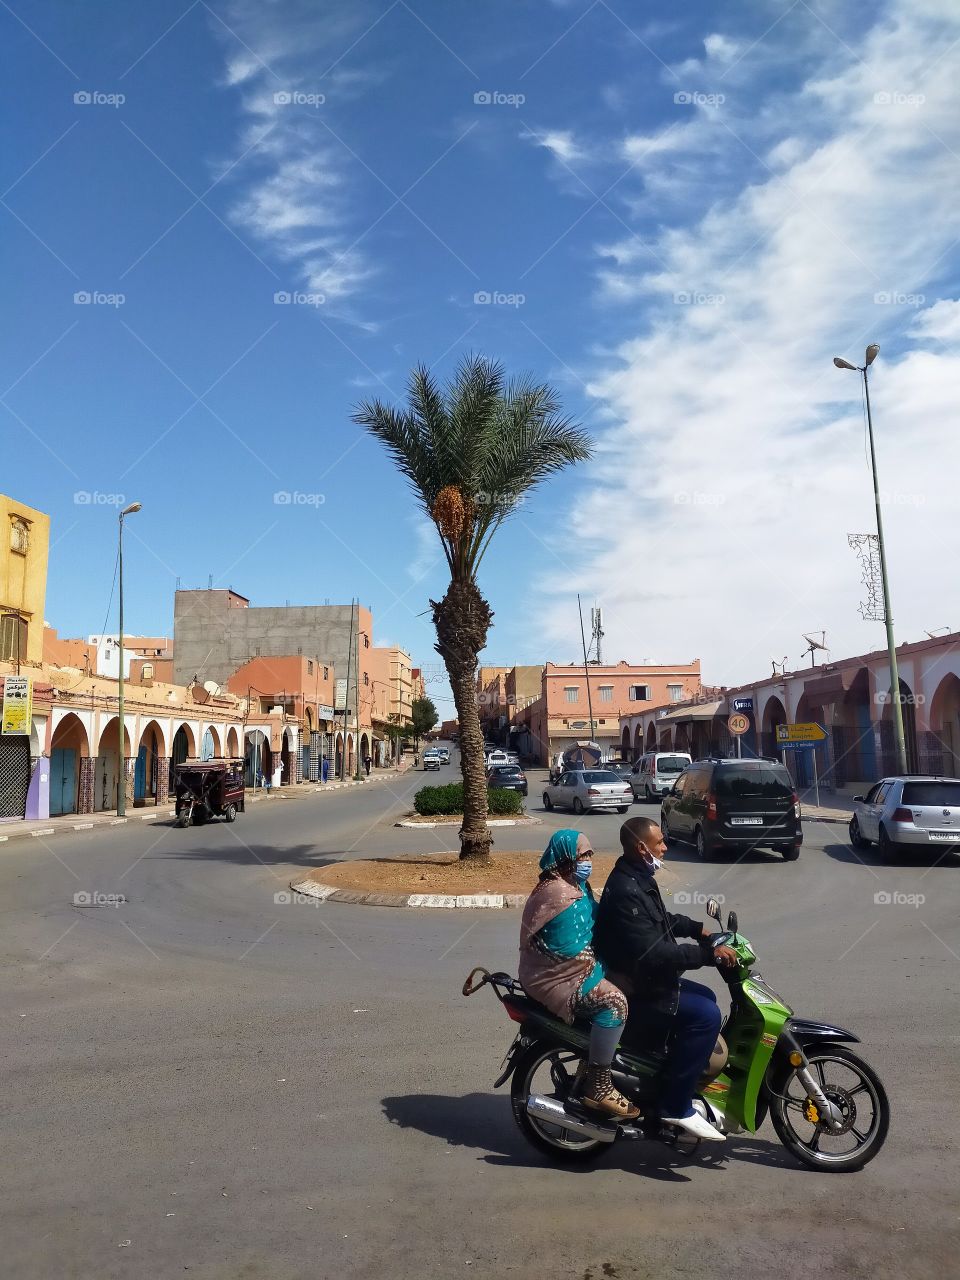 A street through the Souk in Goulimine .we see some arches on the shops ,a man and a woman on a motorbike...a palm tree ...cars...